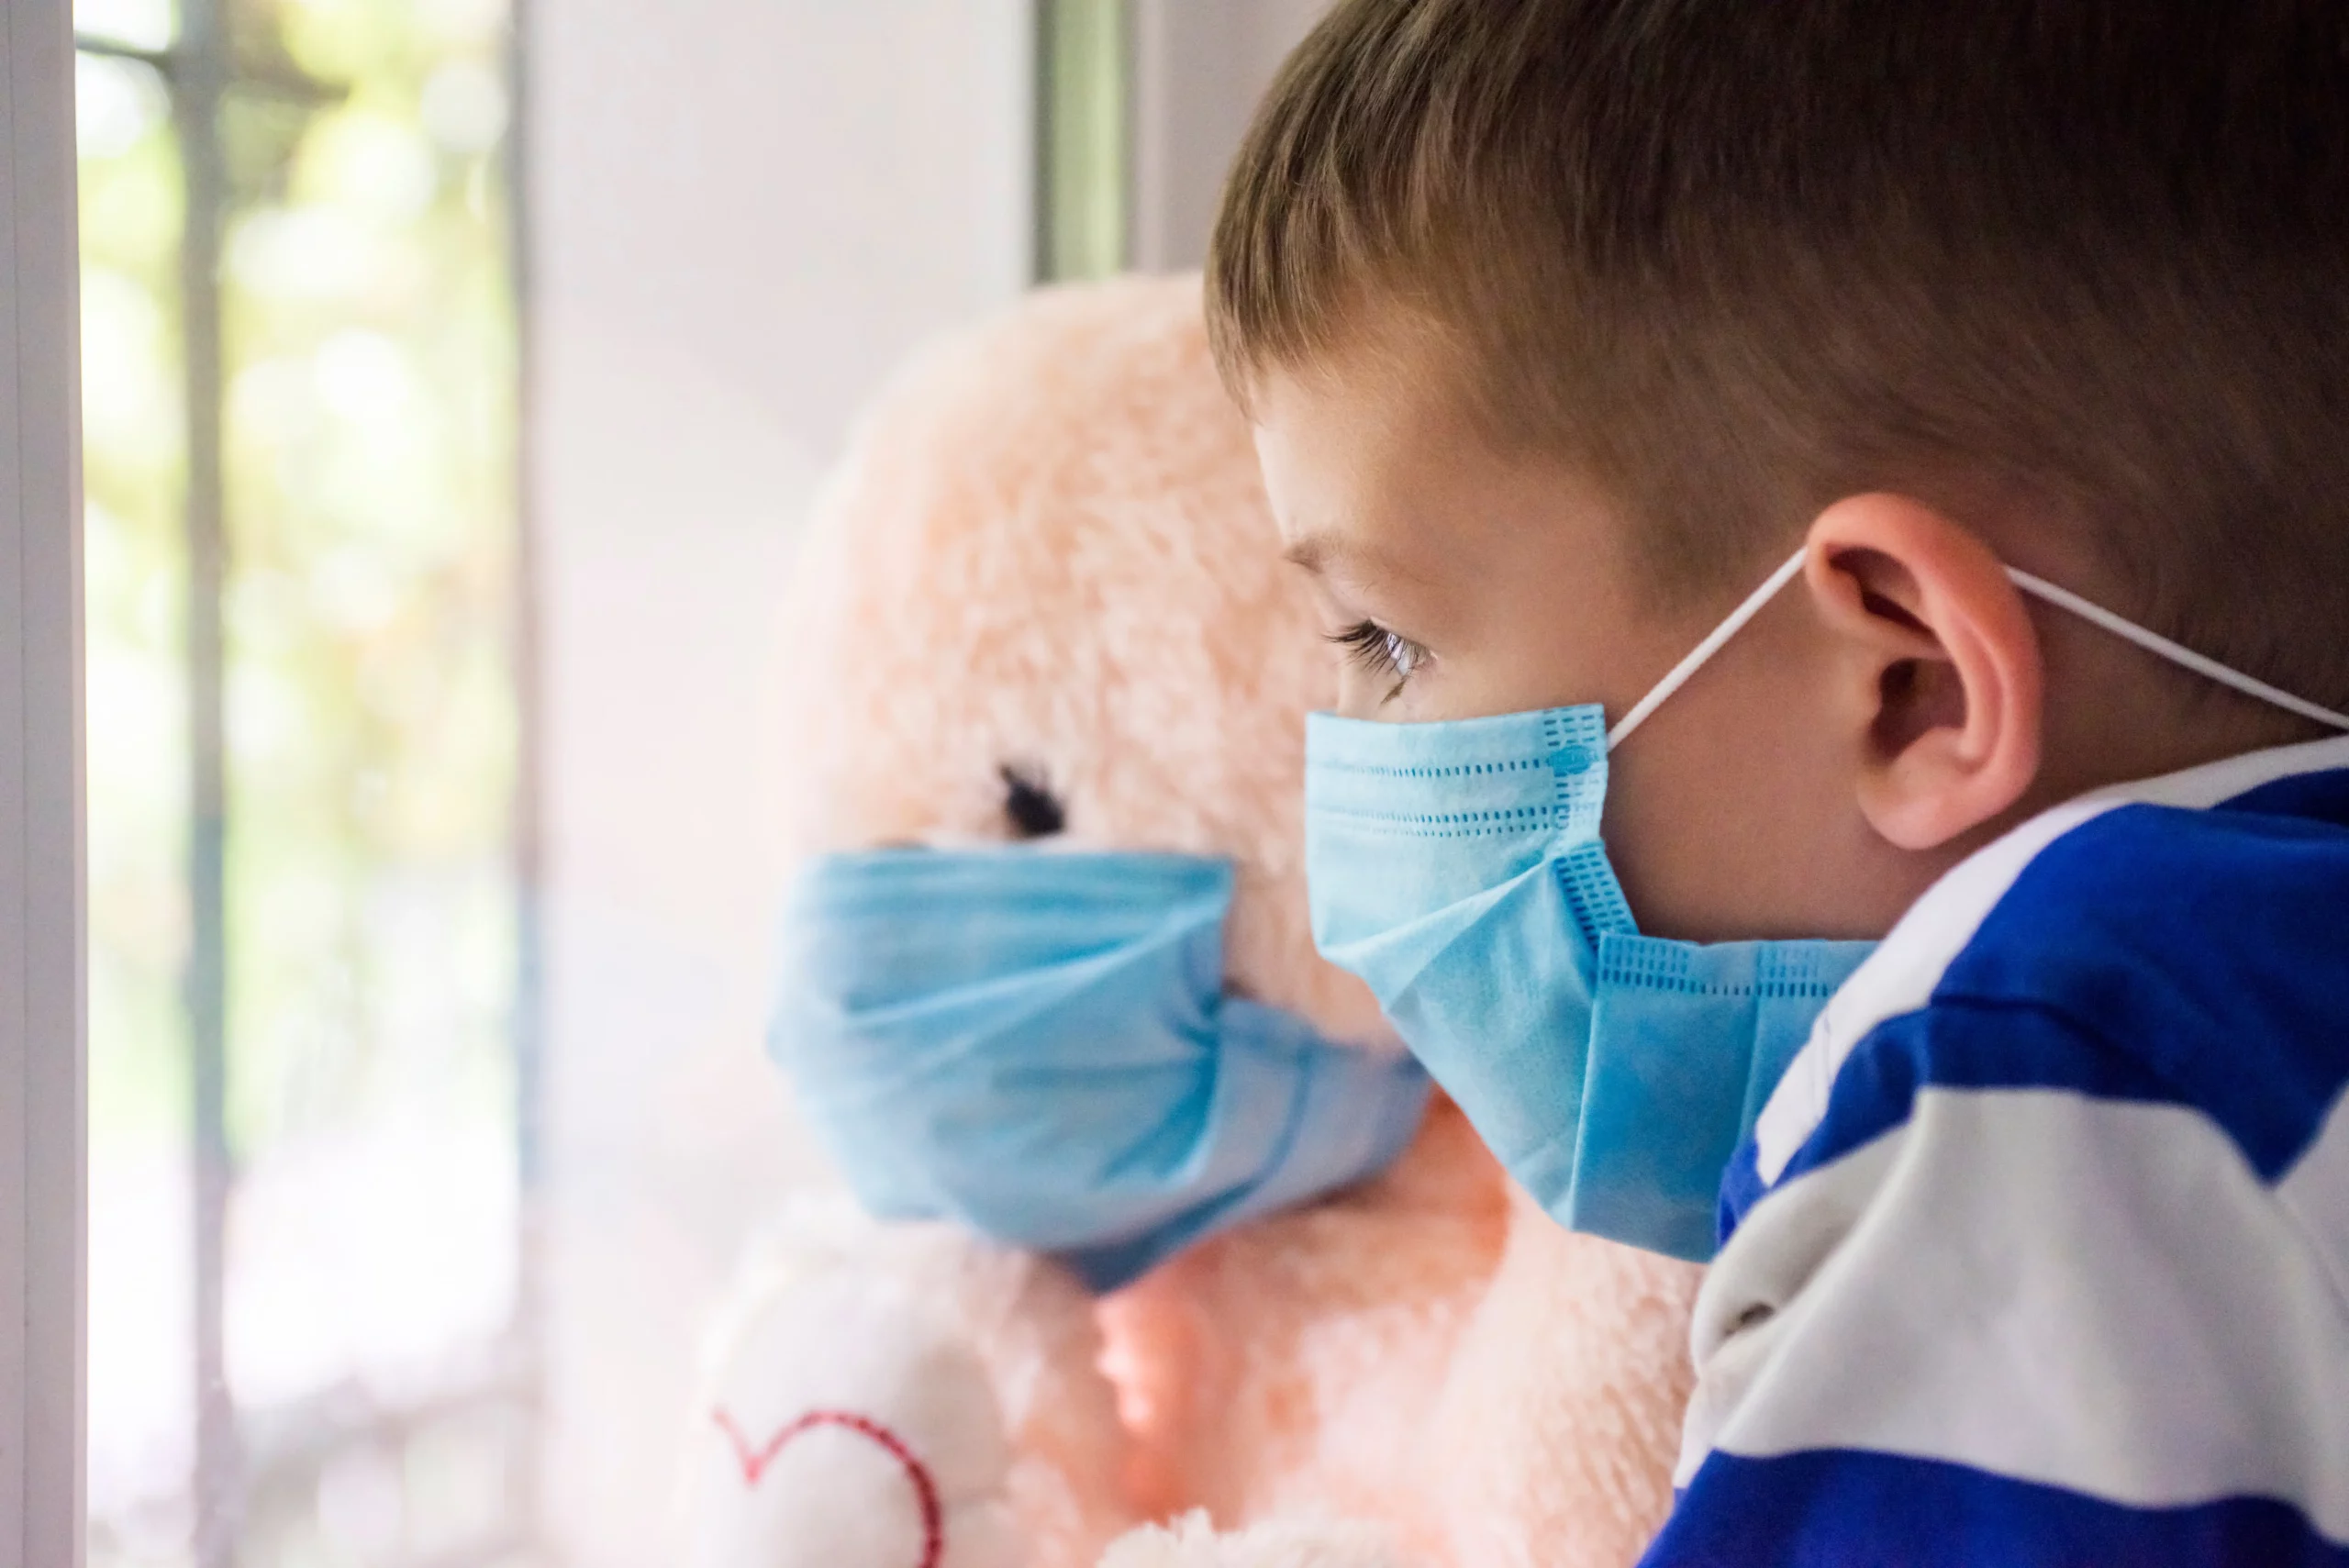 Little boy and his teddy bear holding mask and looking out of window.